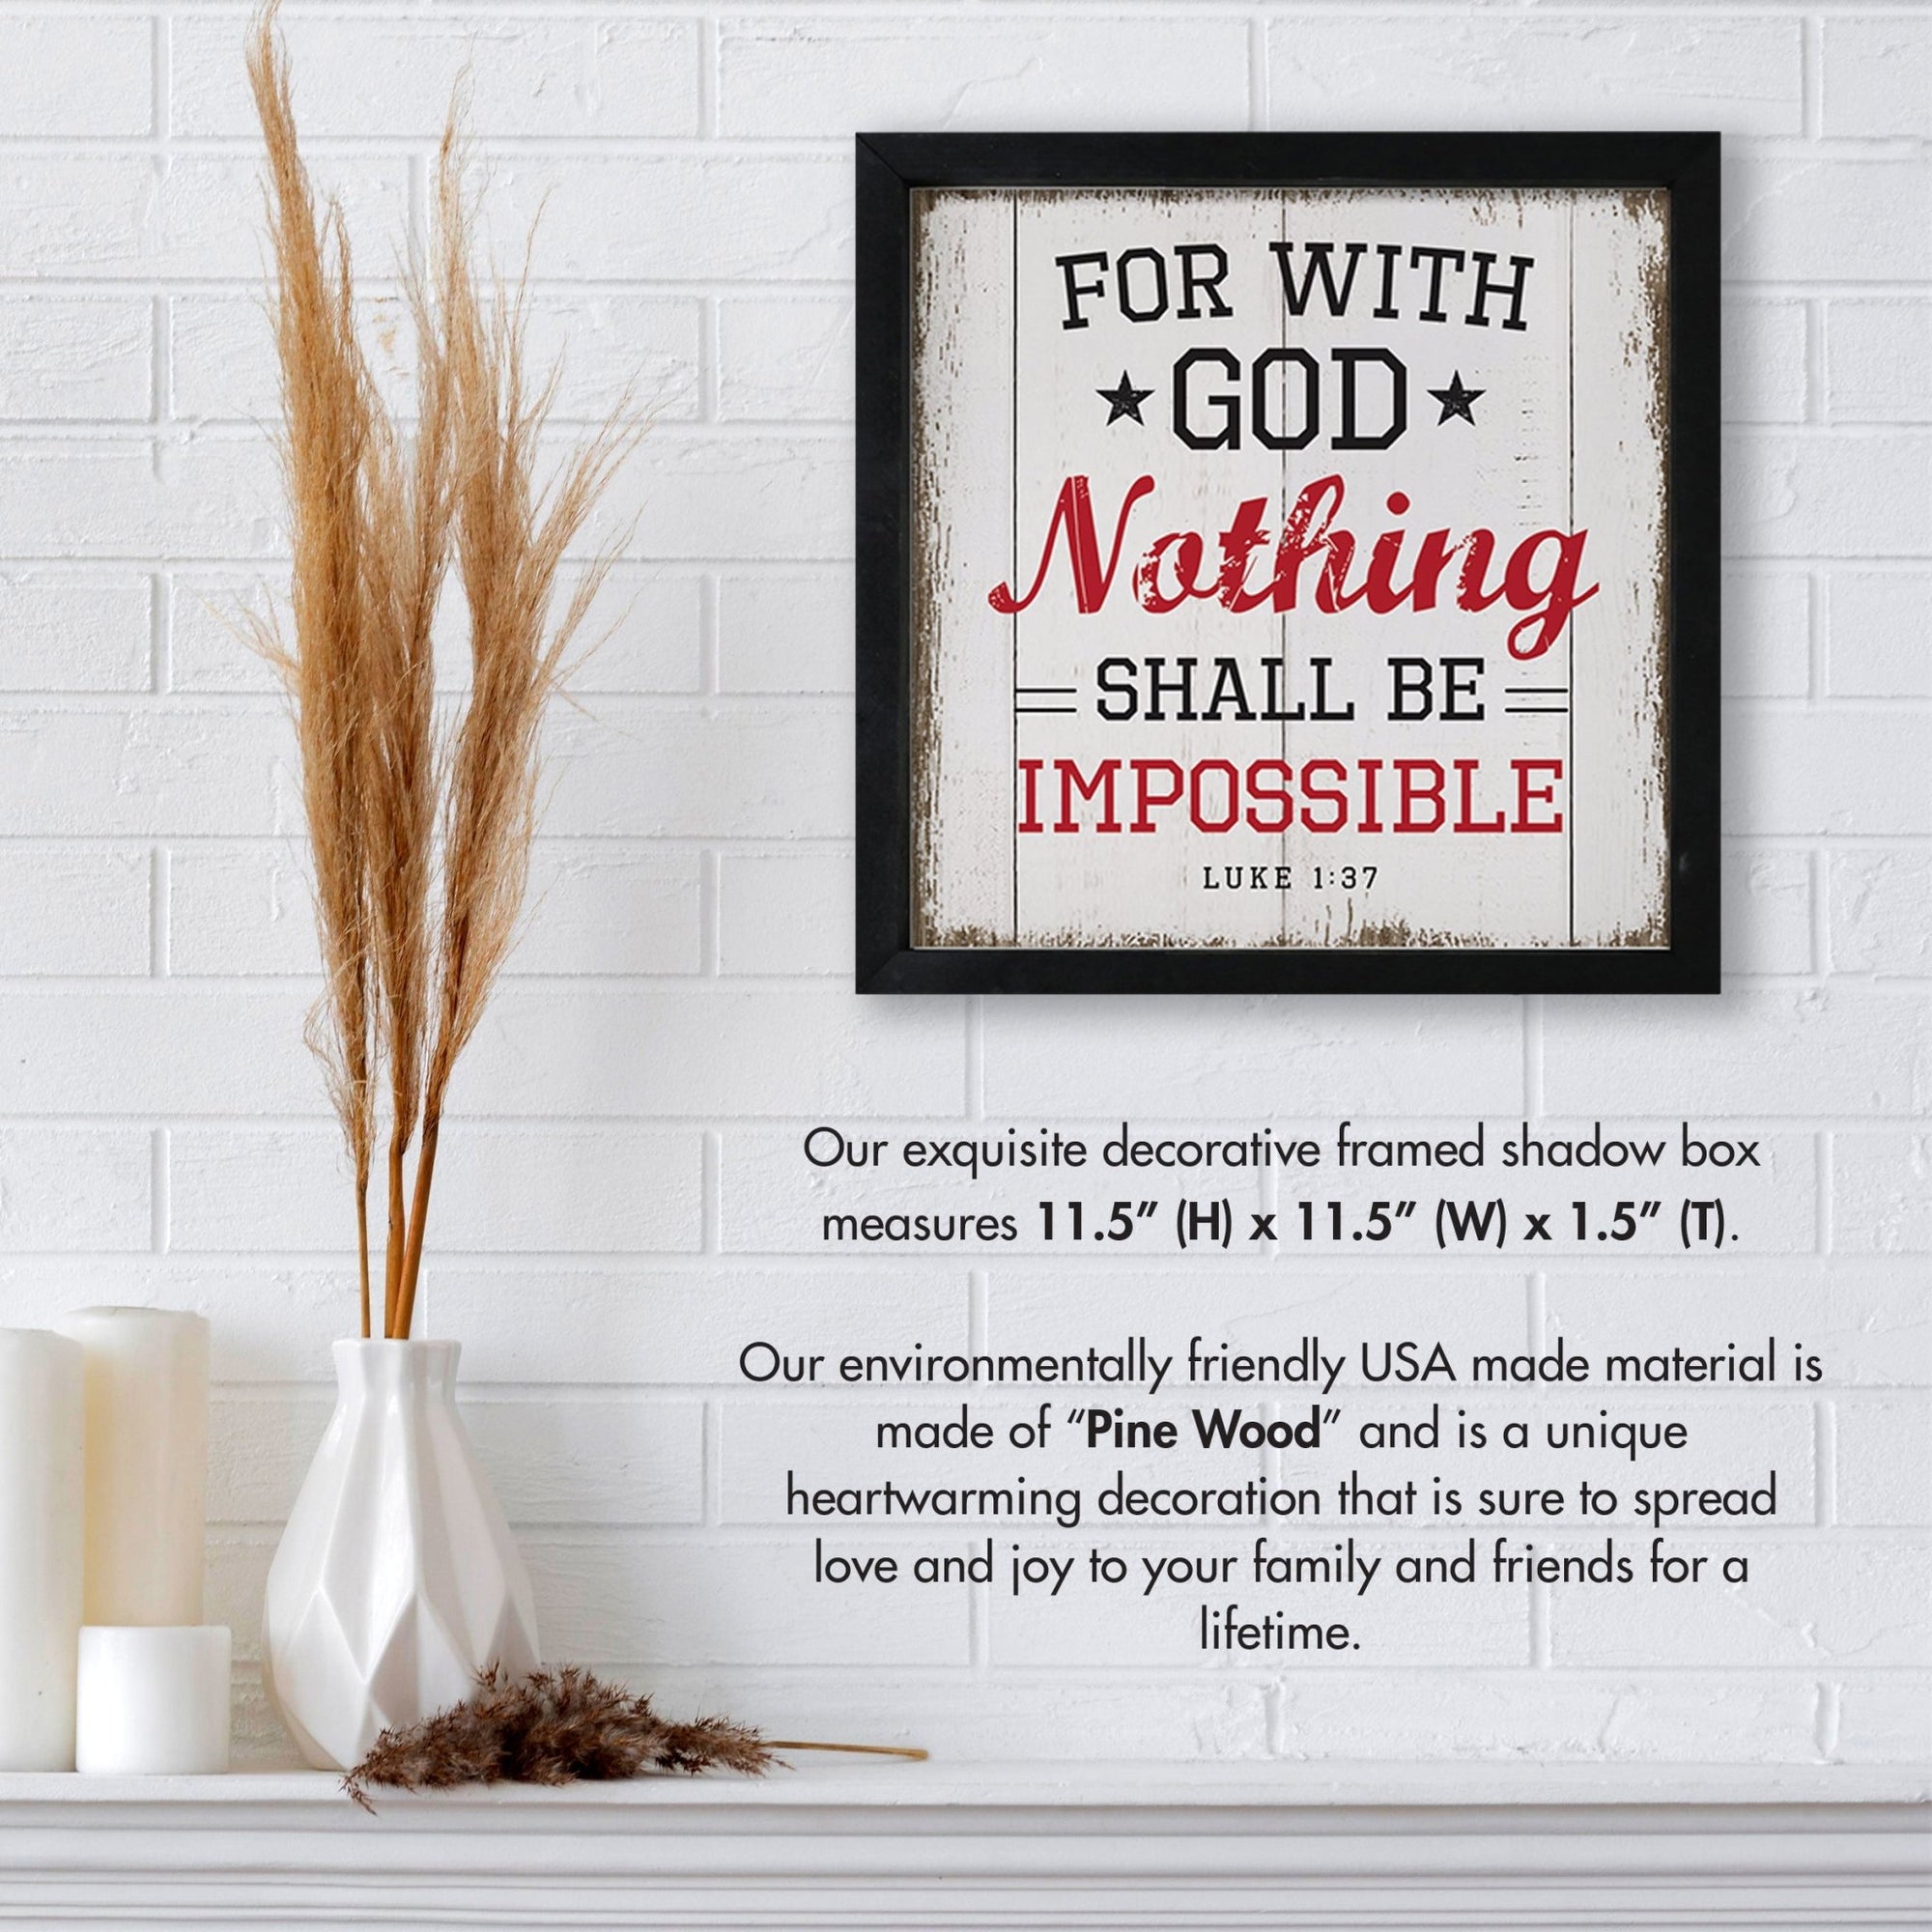 Elegant Baseball Framed Shadow Box Shelf Décor With Inspiring Bible Verses - Nothing Shall Be Impossible - LifeSong Milestones